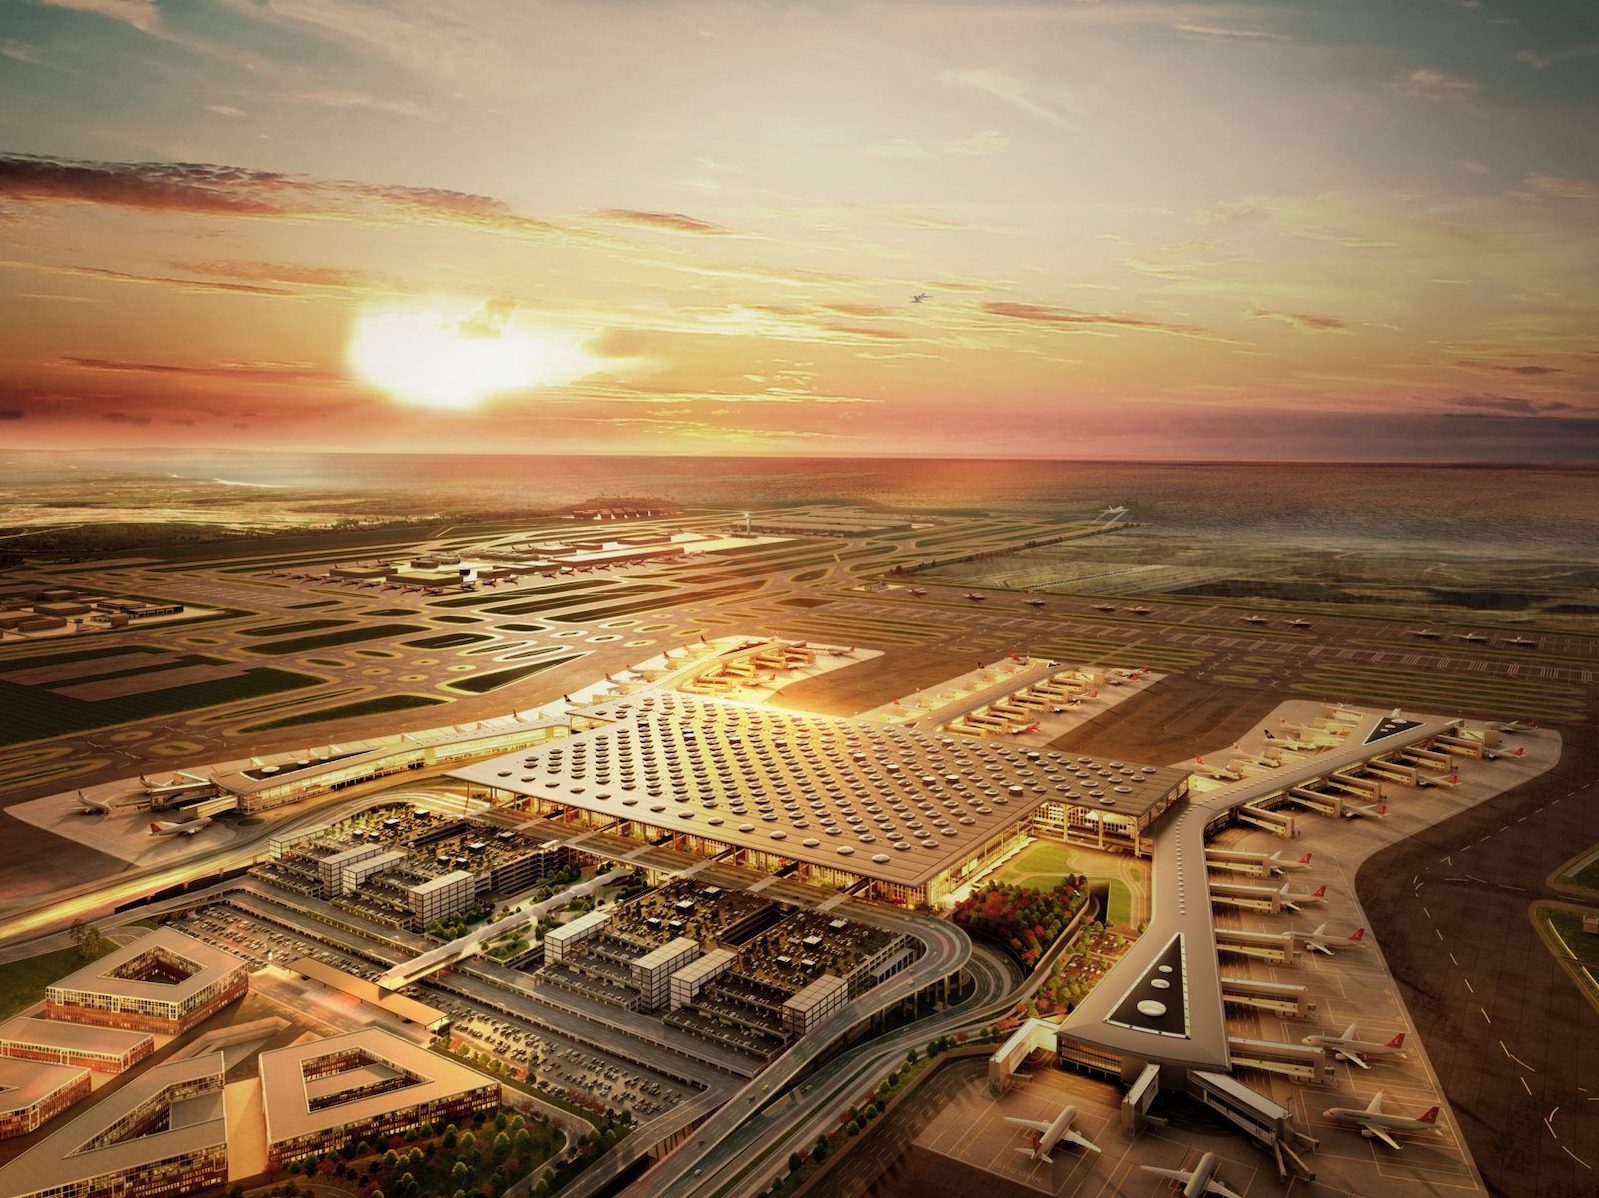 New Istanbul Airport